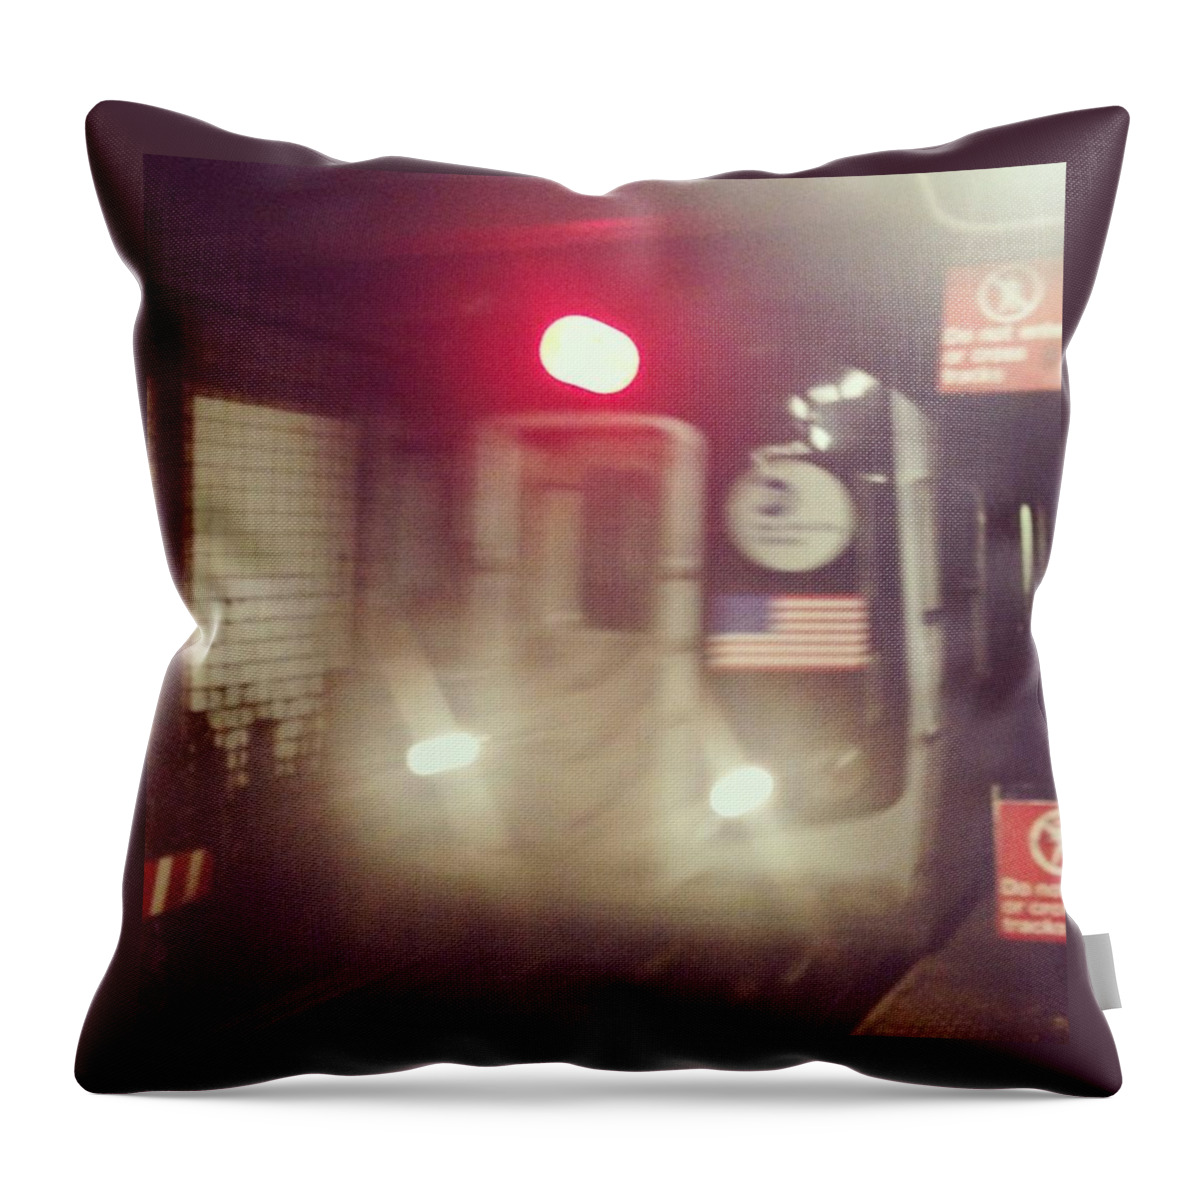 Brookly Throw Pillow featuring the photograph Calling the station by Stefka Ilieva